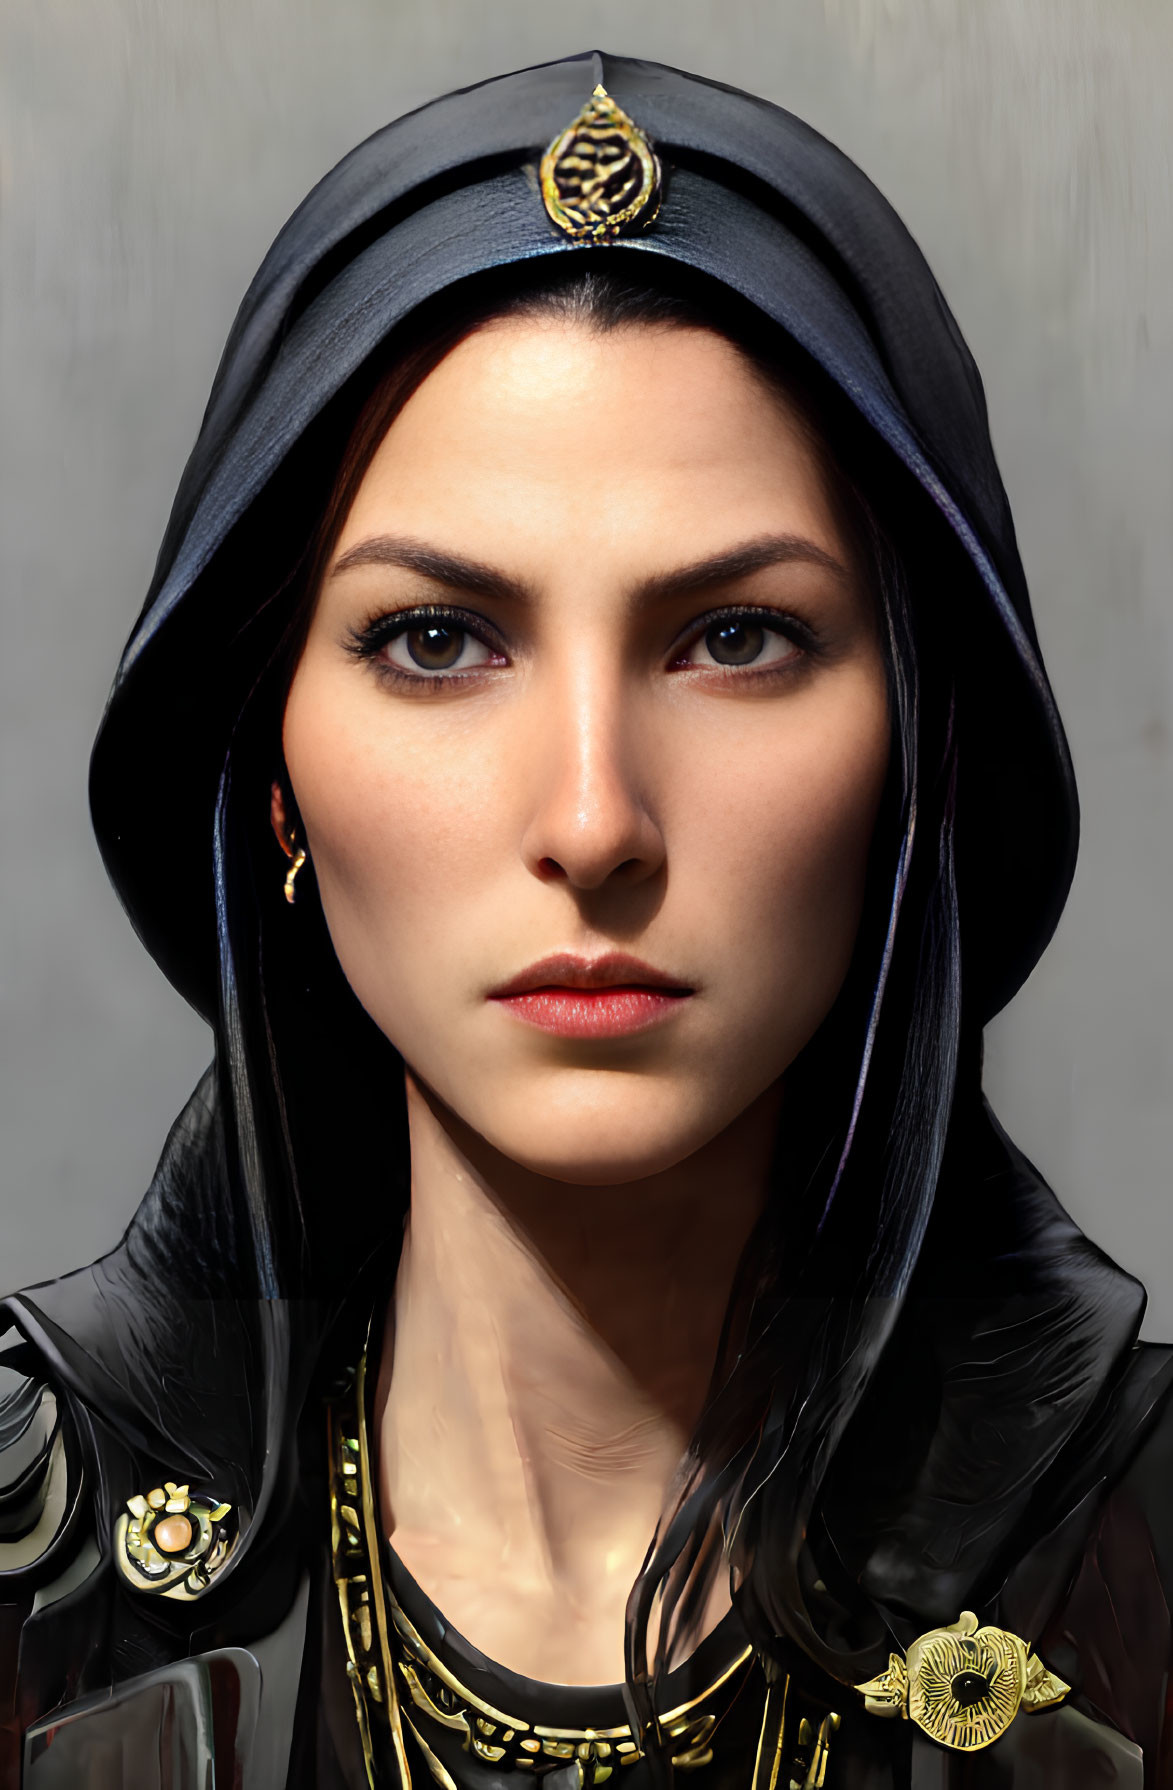 Digital portrait of woman in dark hood with gold emblem, uniform, and medals, exuding authority.